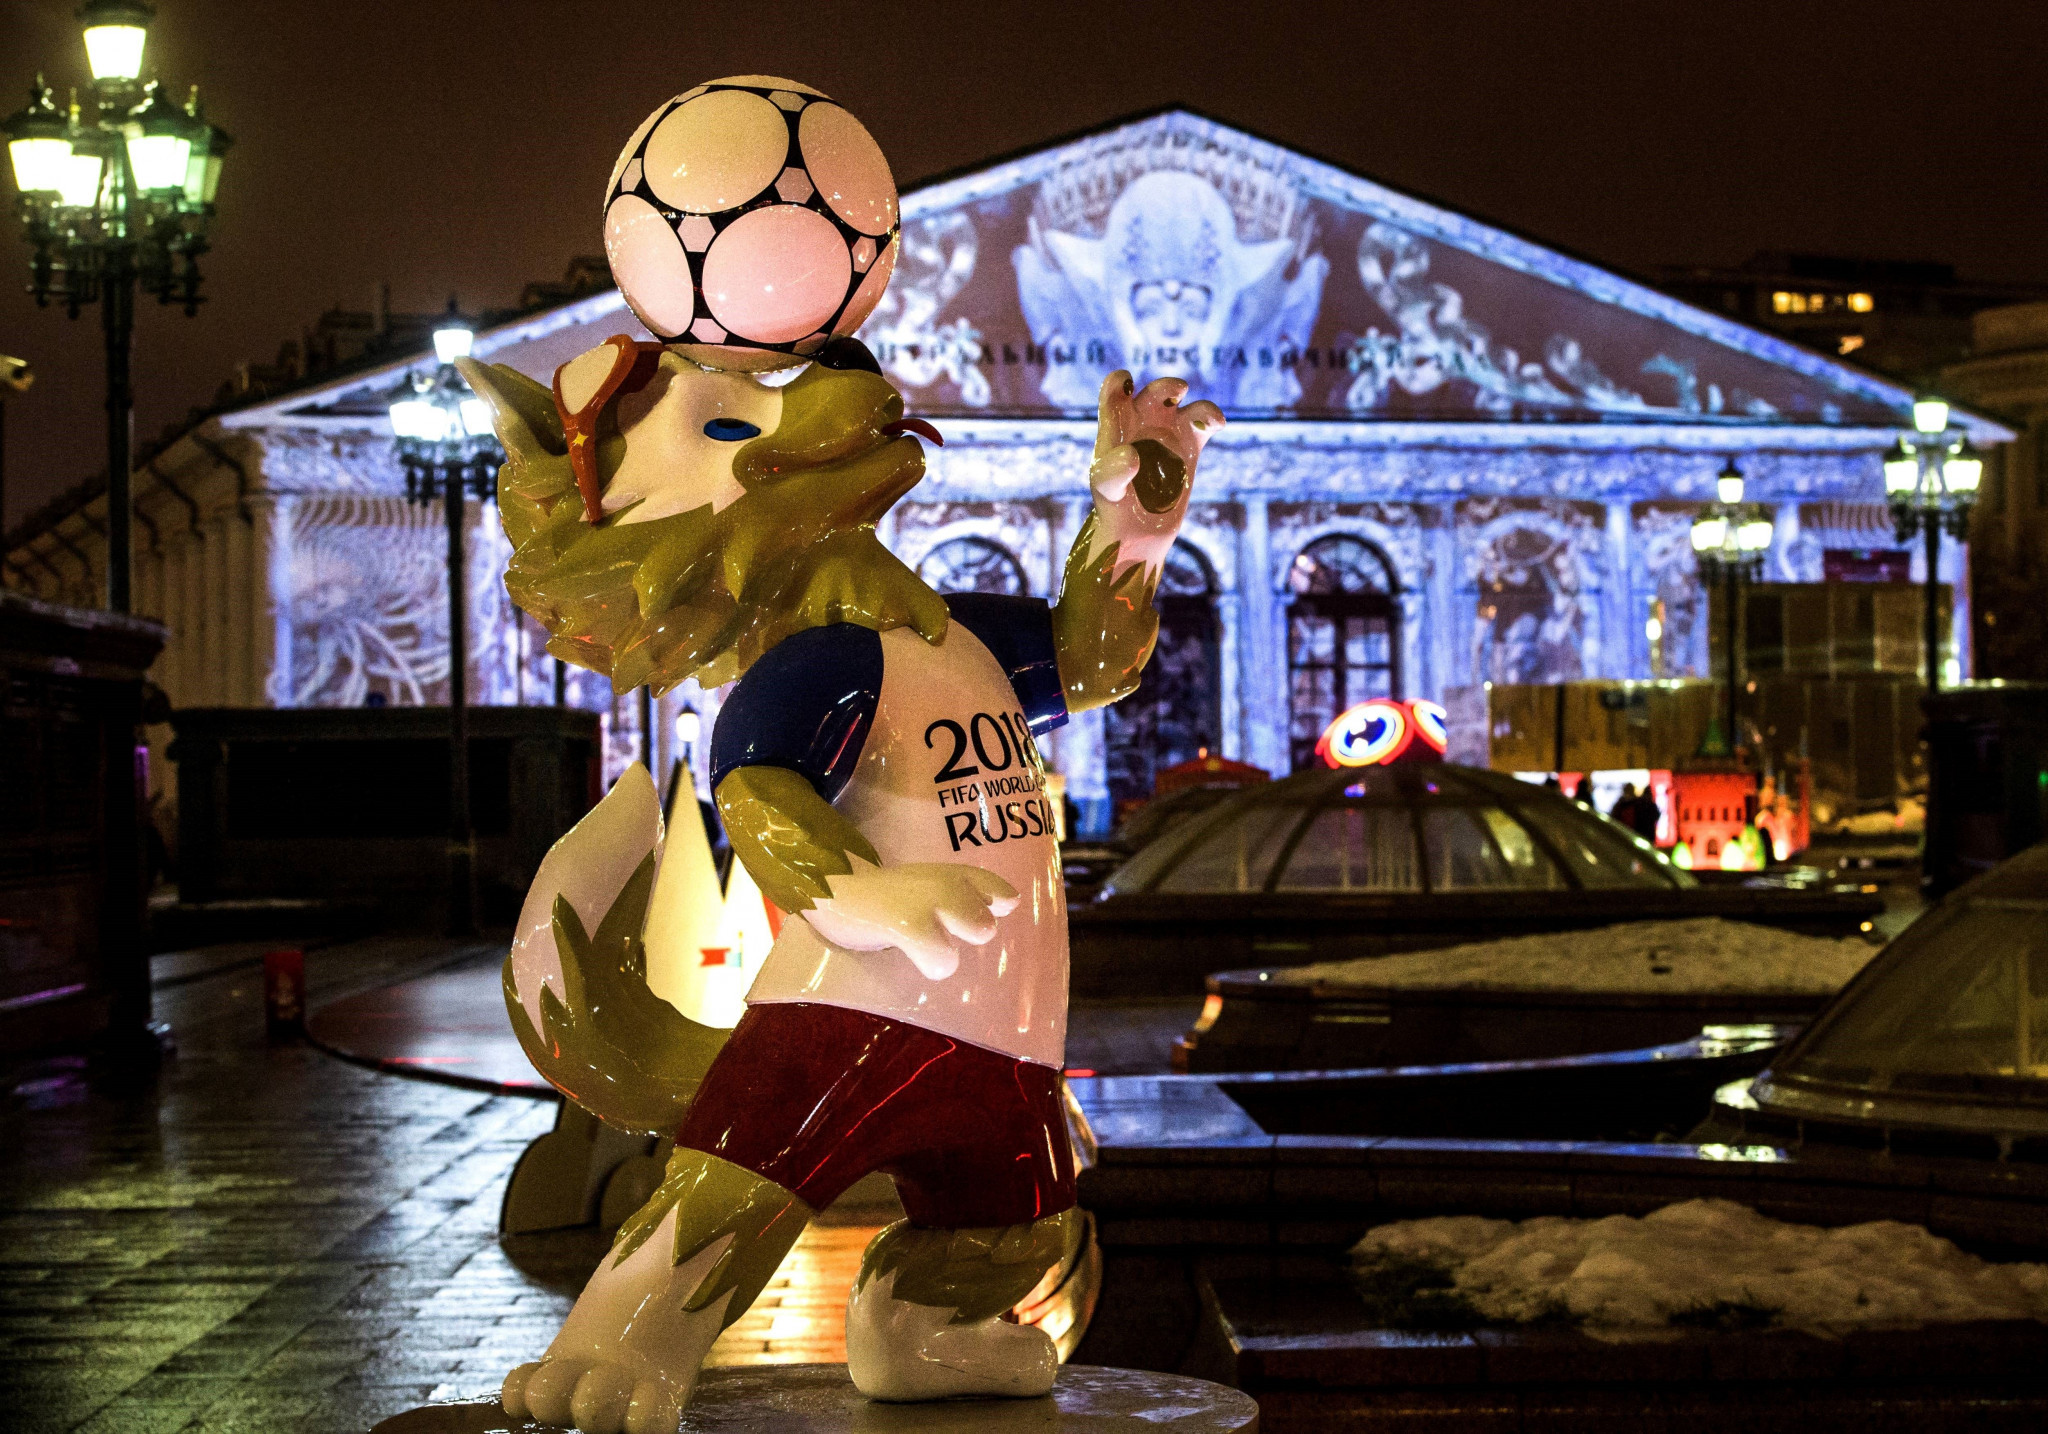 The 2018 FIFA World Cup is scheduled to take place in Russia from June 14 to July 15 ©Getty Images